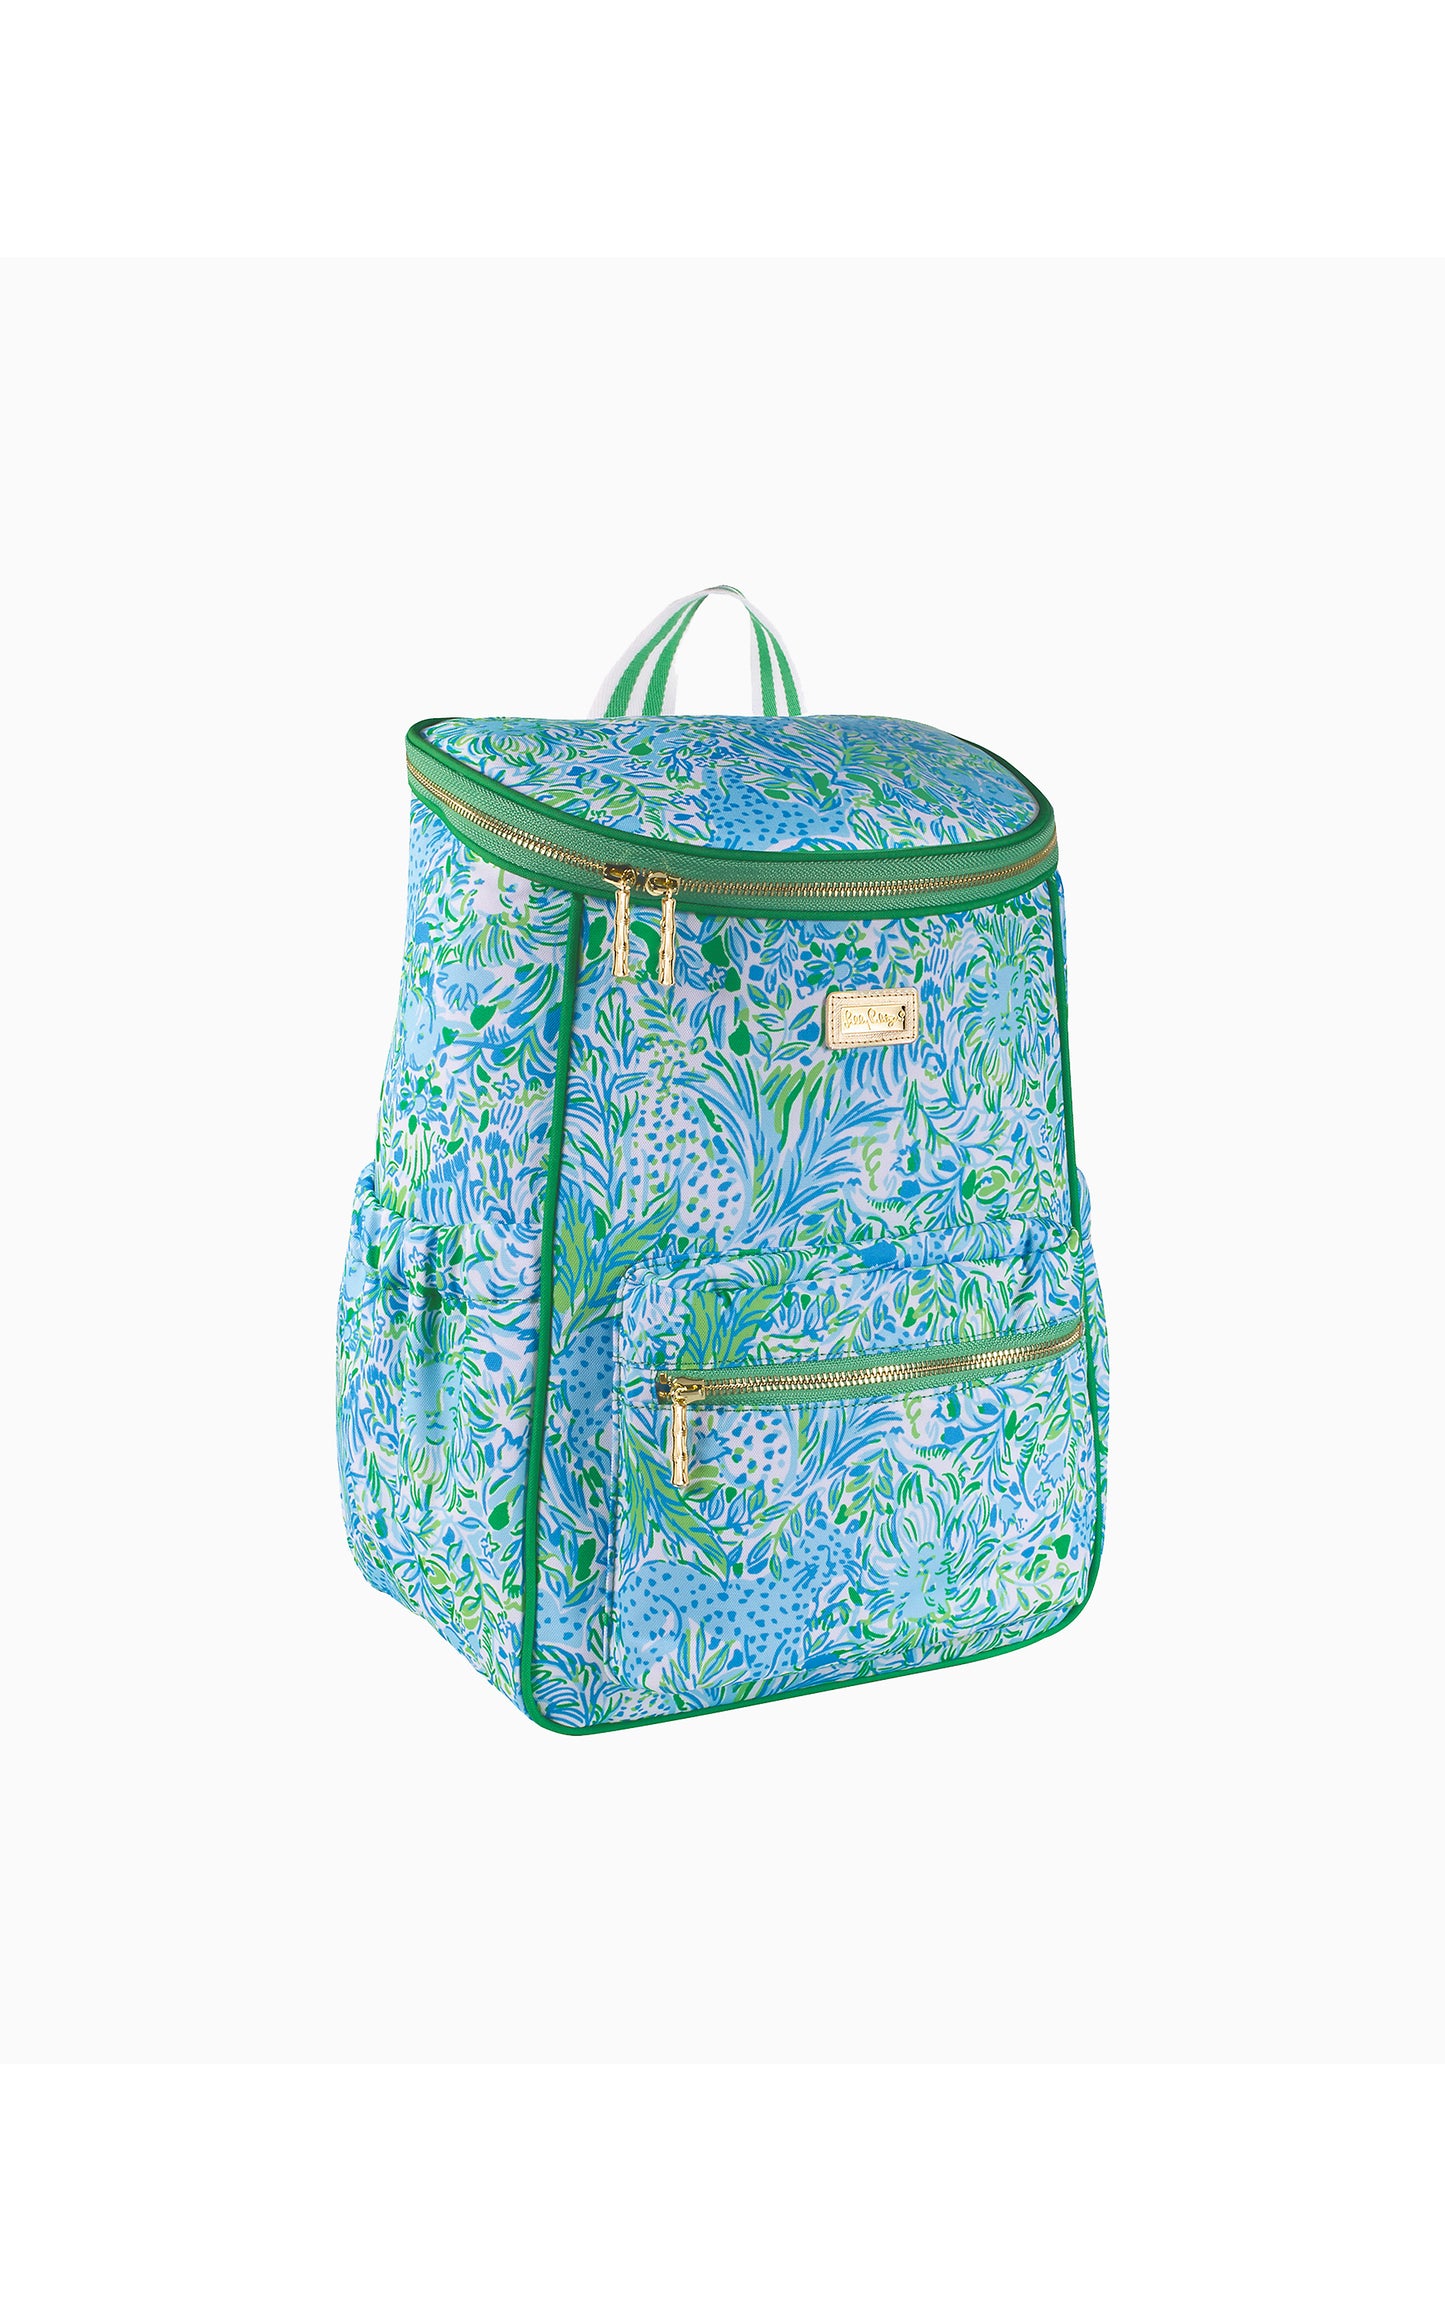 Backpack Cooler in Hydra Blue Dandy Lions